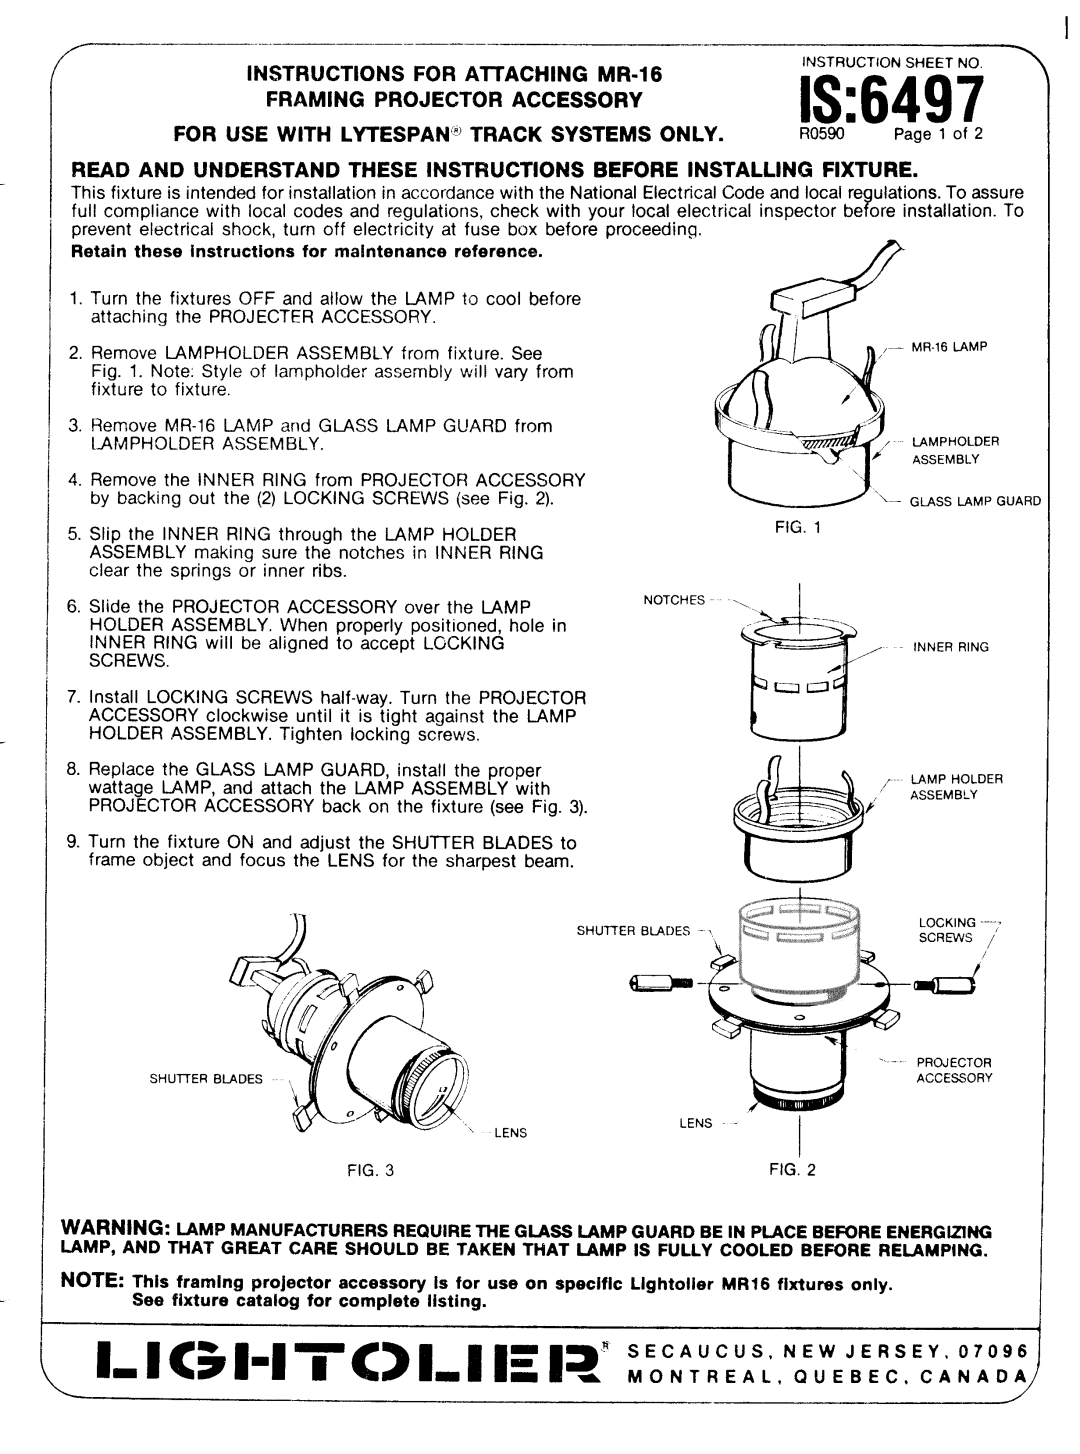 Lightolier S:6497 instruction sheet AllACHING, MR-16, Instructions For, Is, Projector Accessory, For Use With, Lytespan’ 